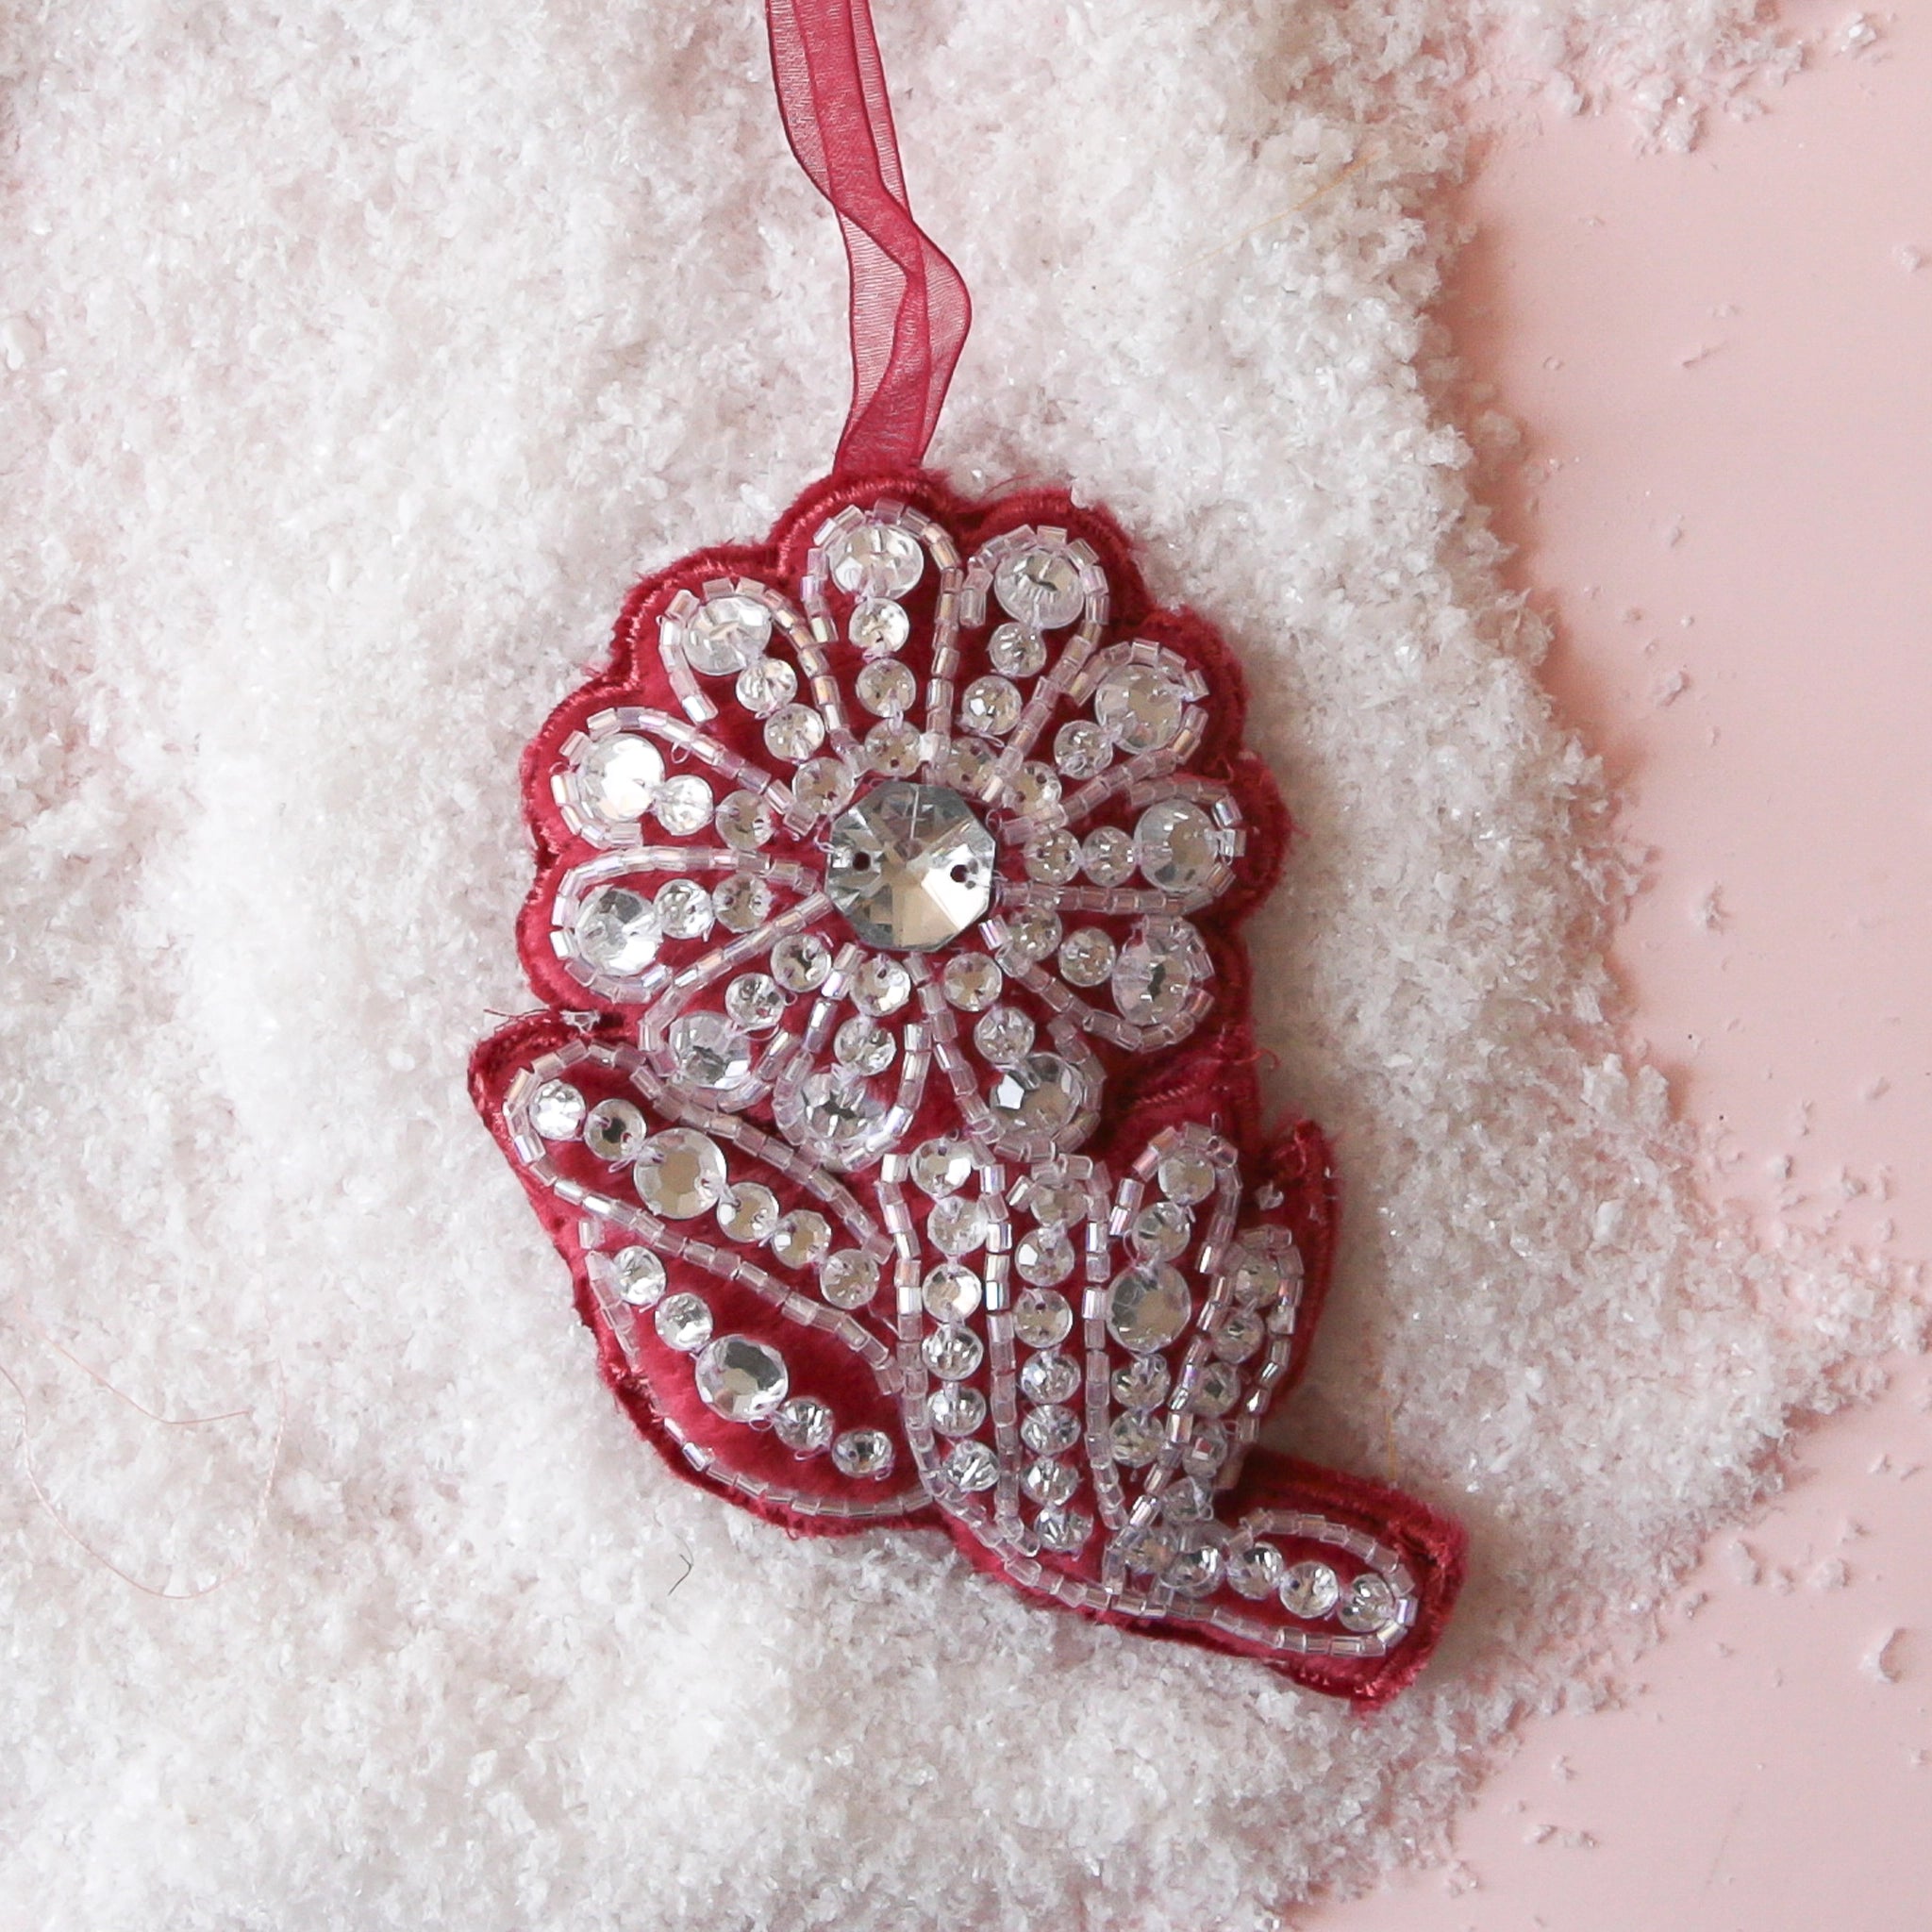 On a pink snowy background is a maroon flower shaped ornament with rhinestones all over.